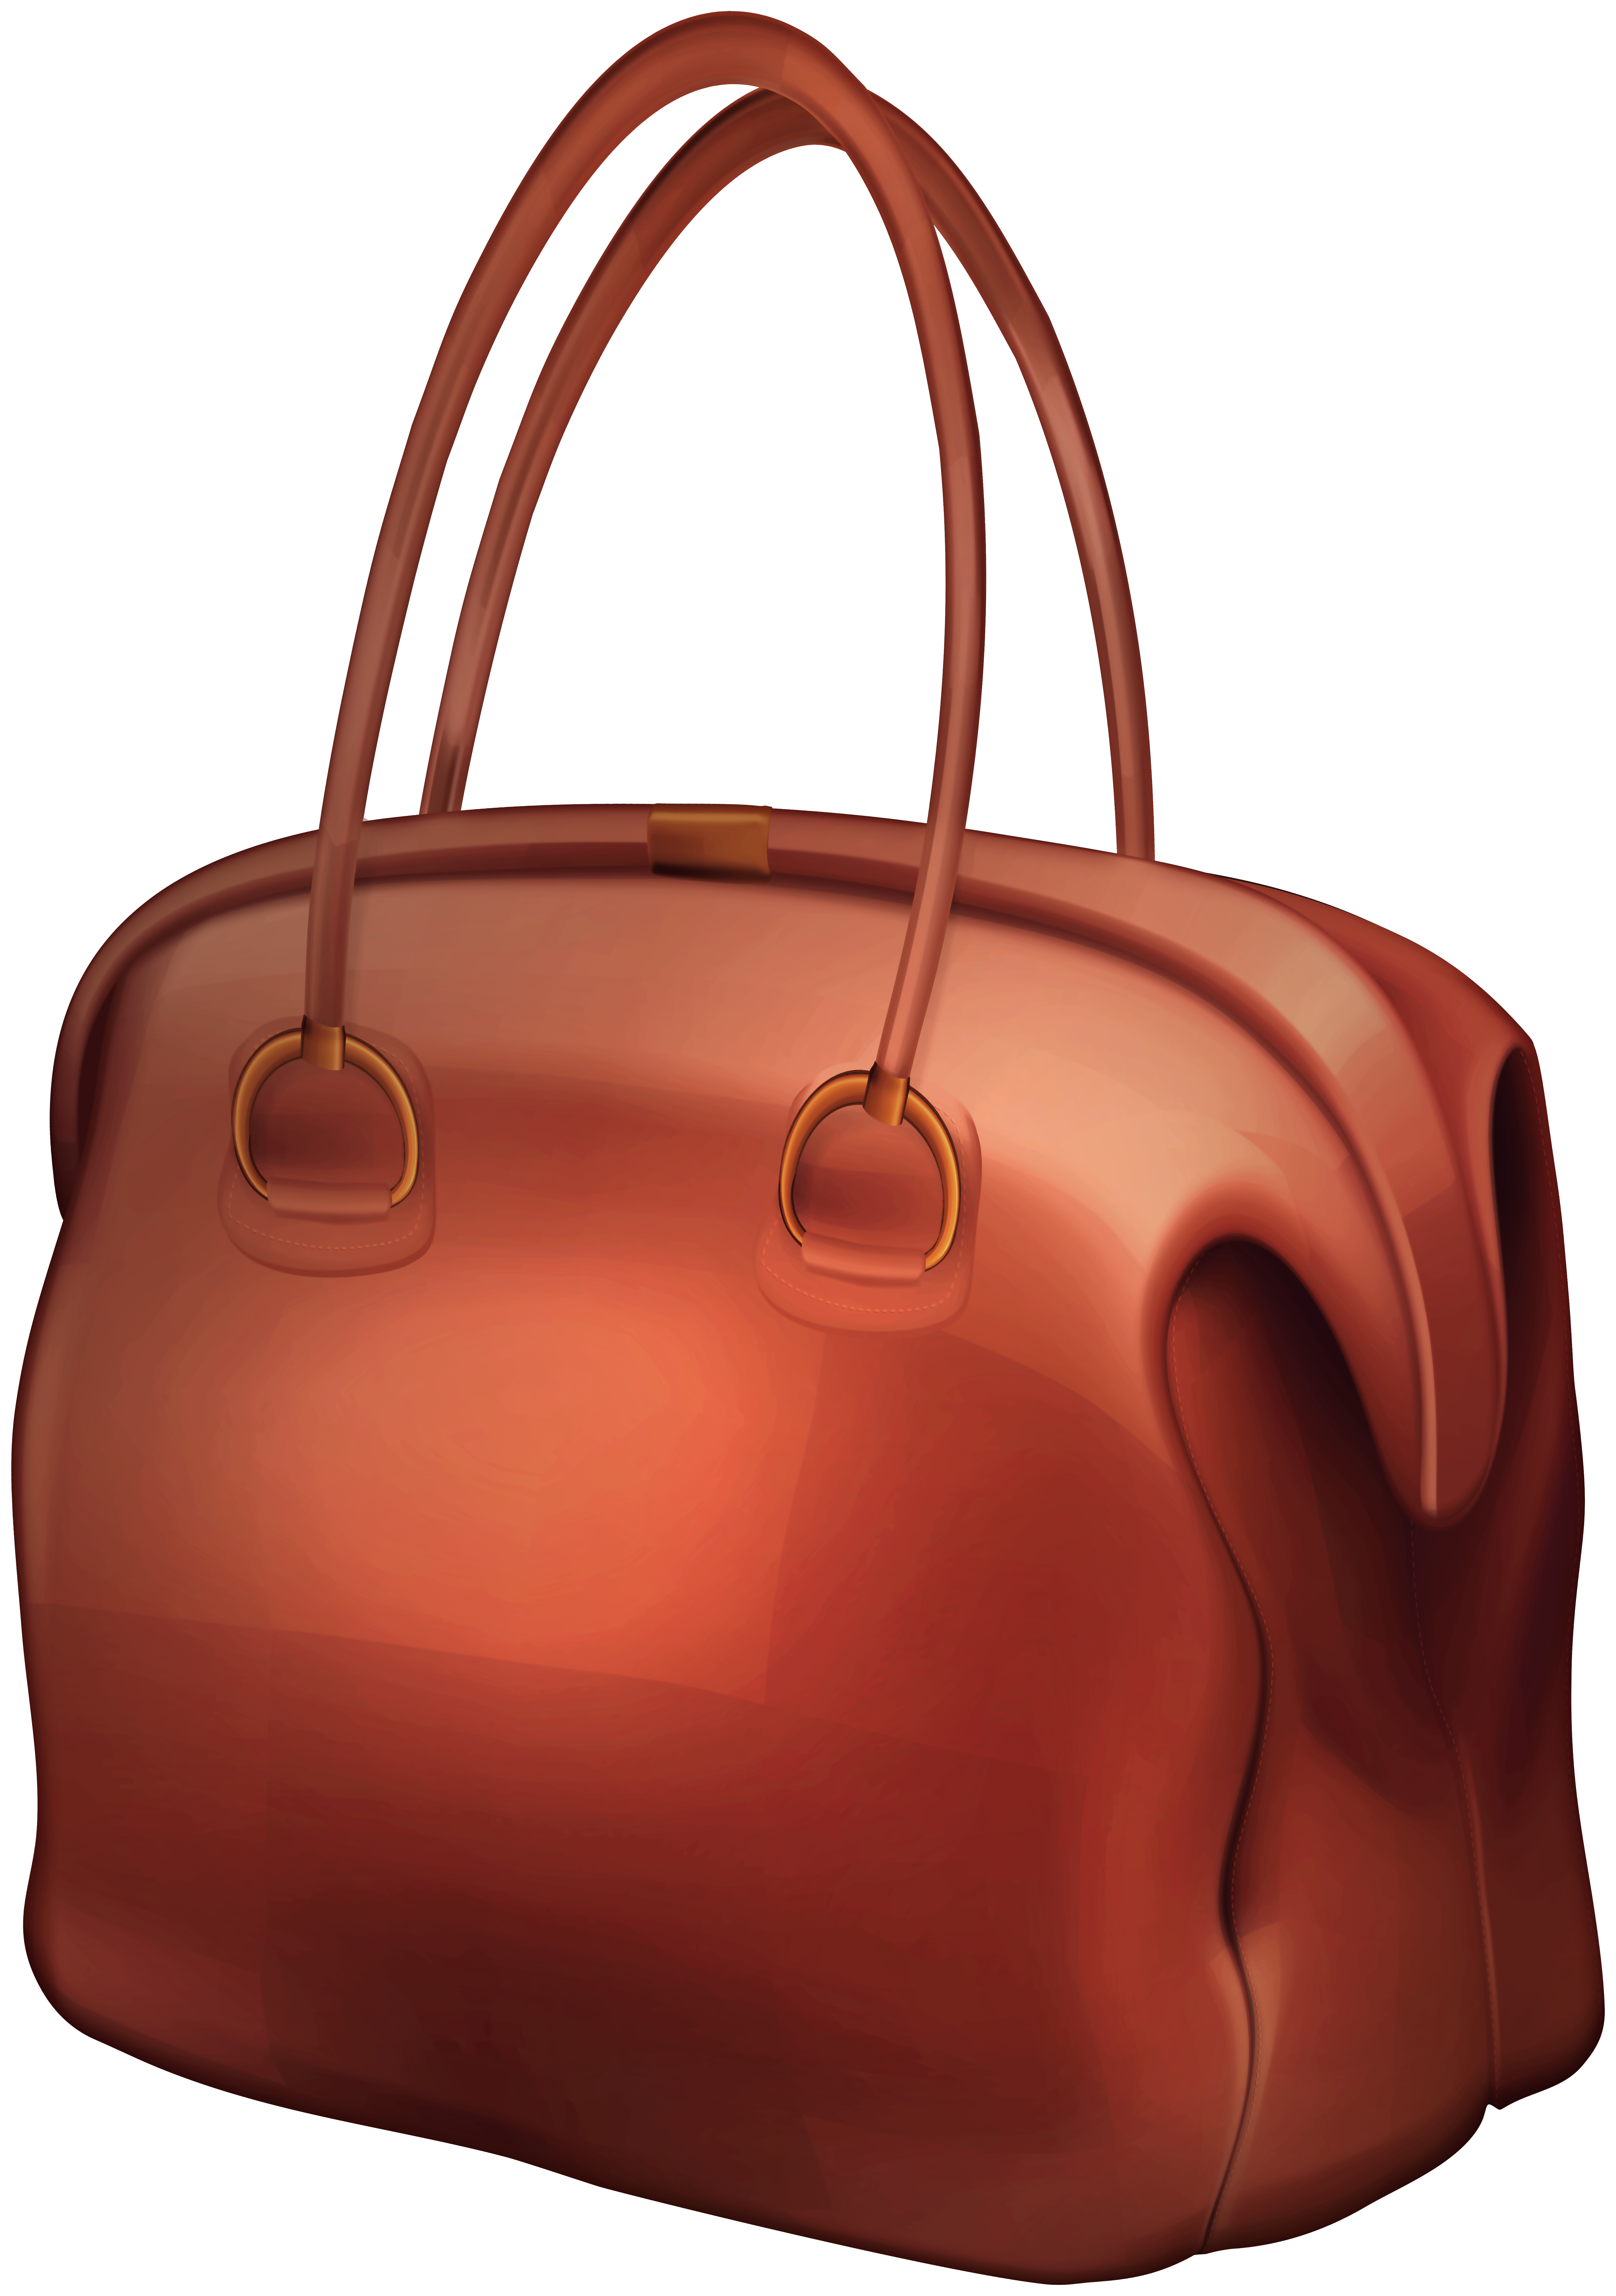 eco bag png graphic clipart design 23623174 PNG